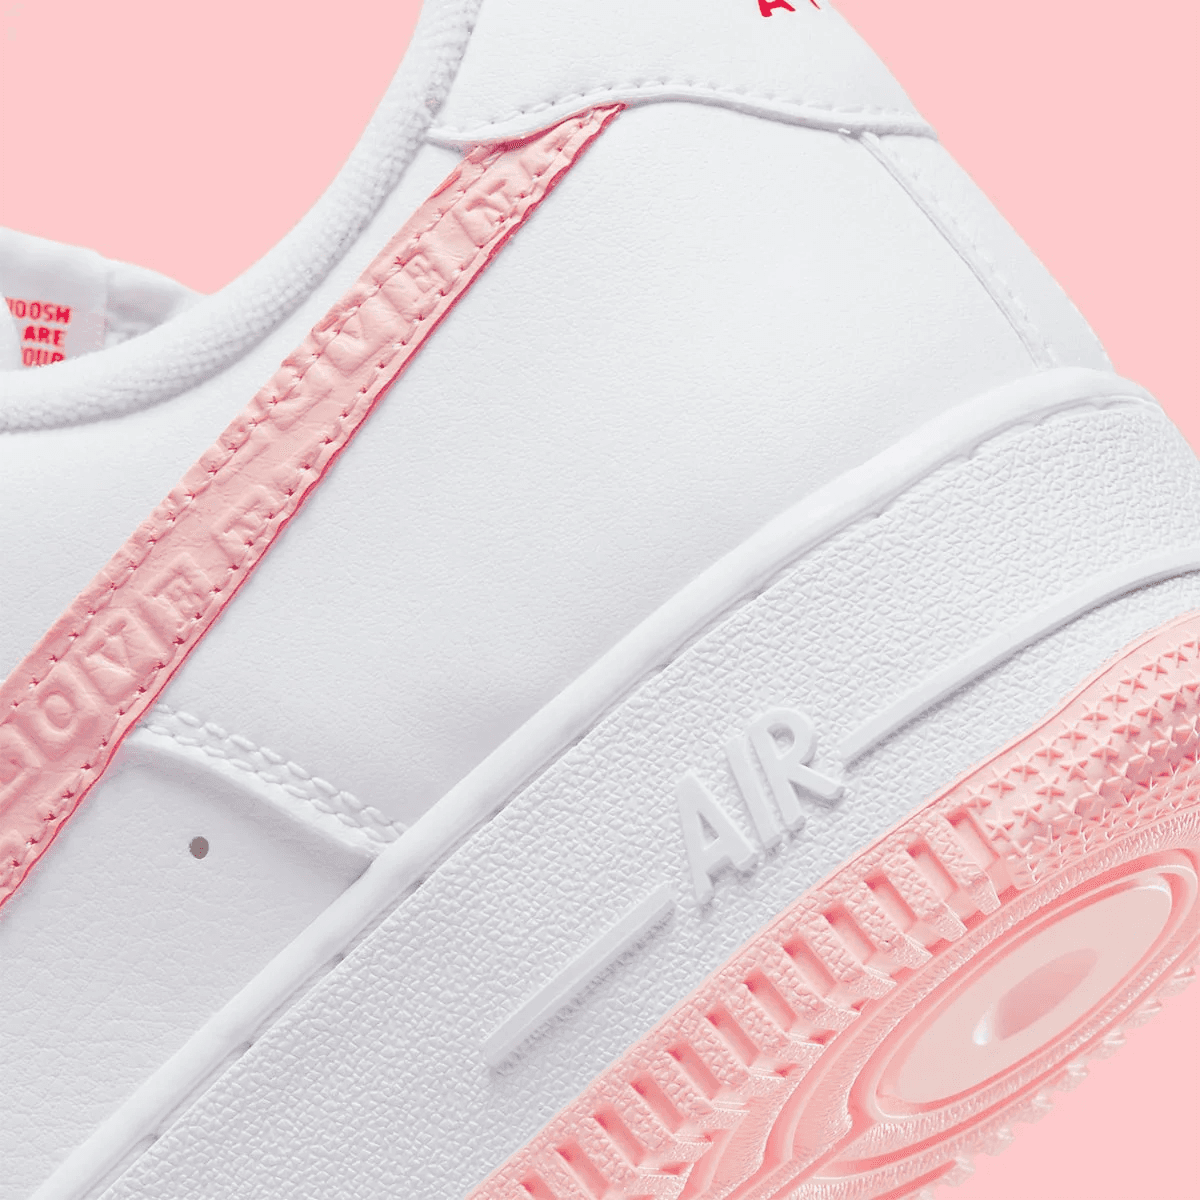 Nike Air Force 1 'Valentine's Day'